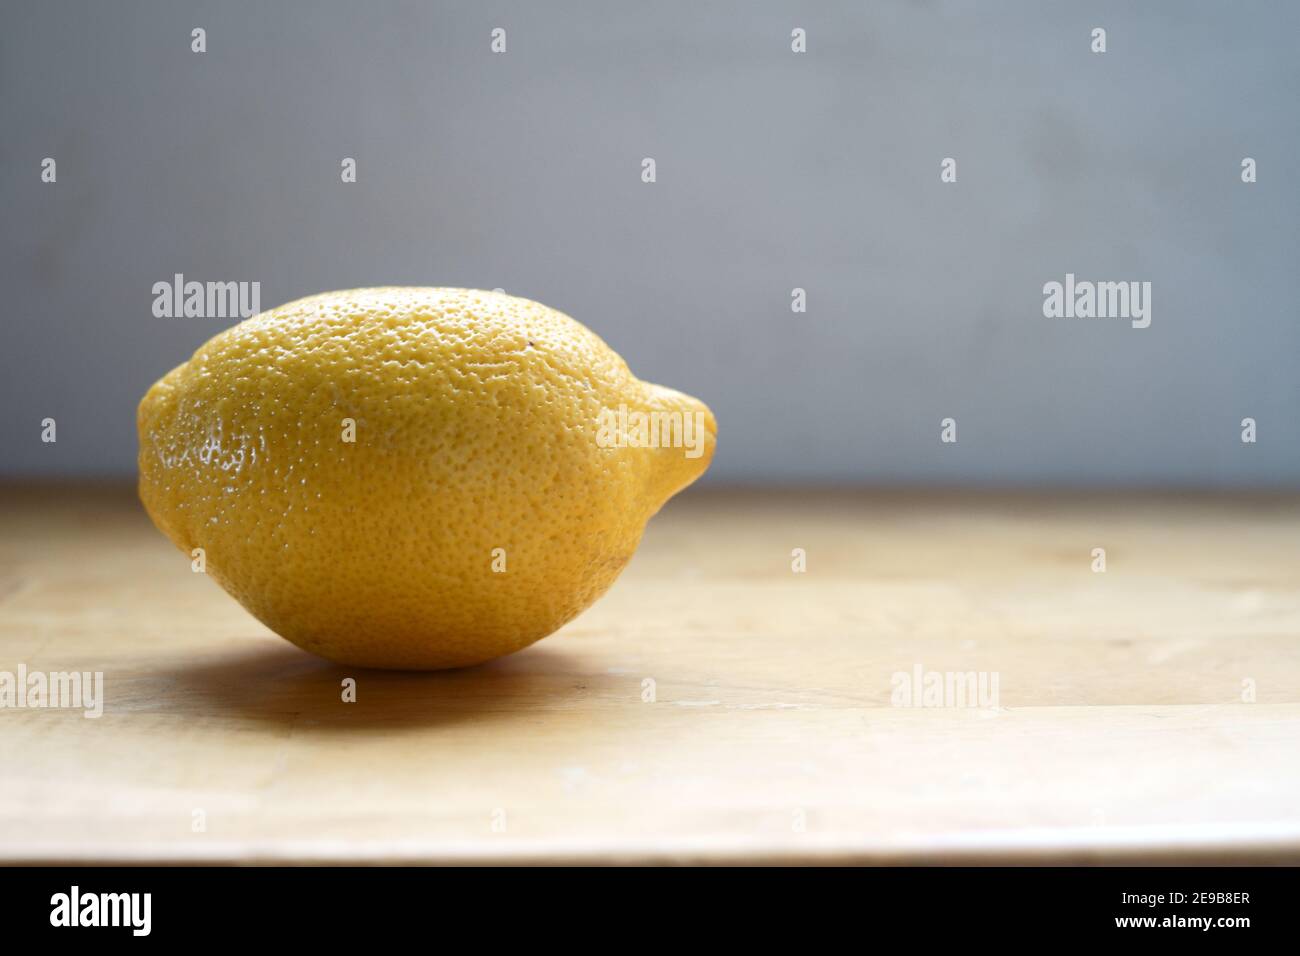 Portrait of fresh and organic ingredients: The lemon, a common used household flavor enhancer. Yellow and roughed texture. Stock Photo